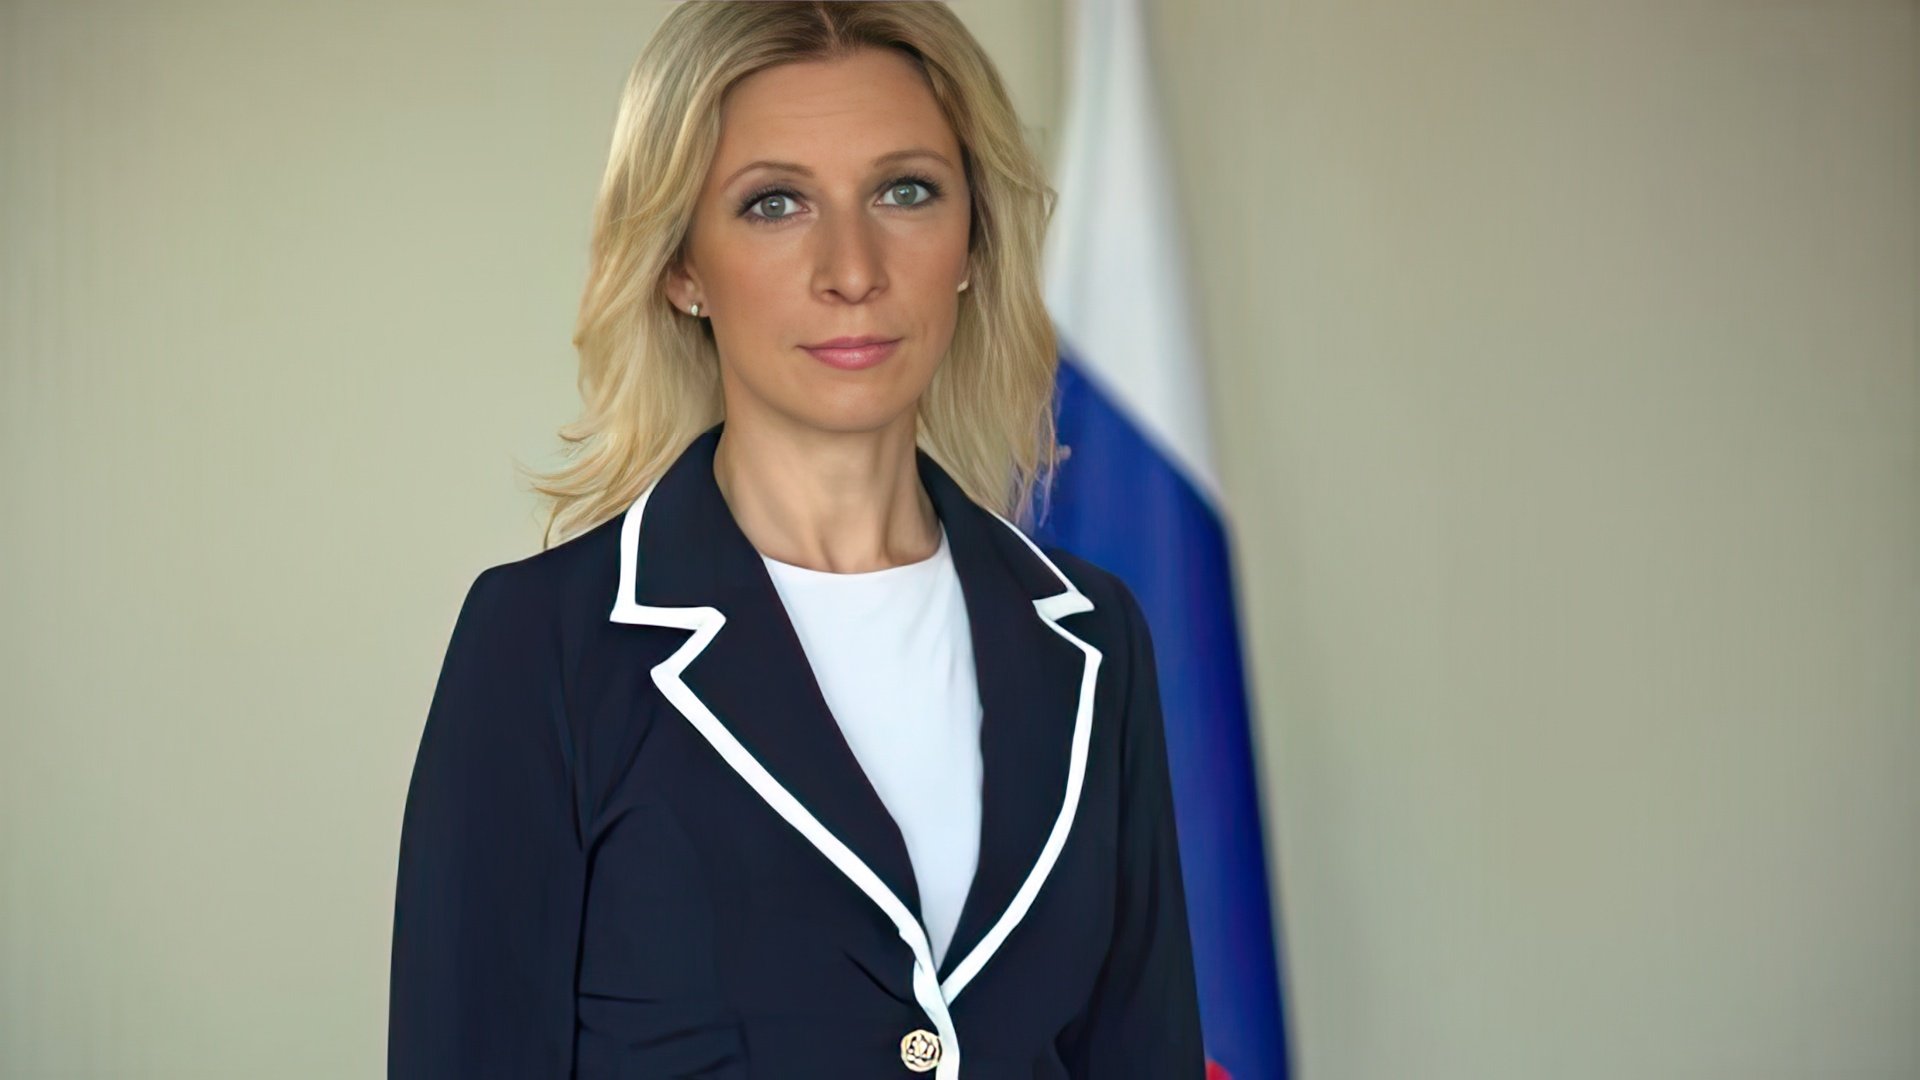 Maria Zakharova is one of the most powerful Russians